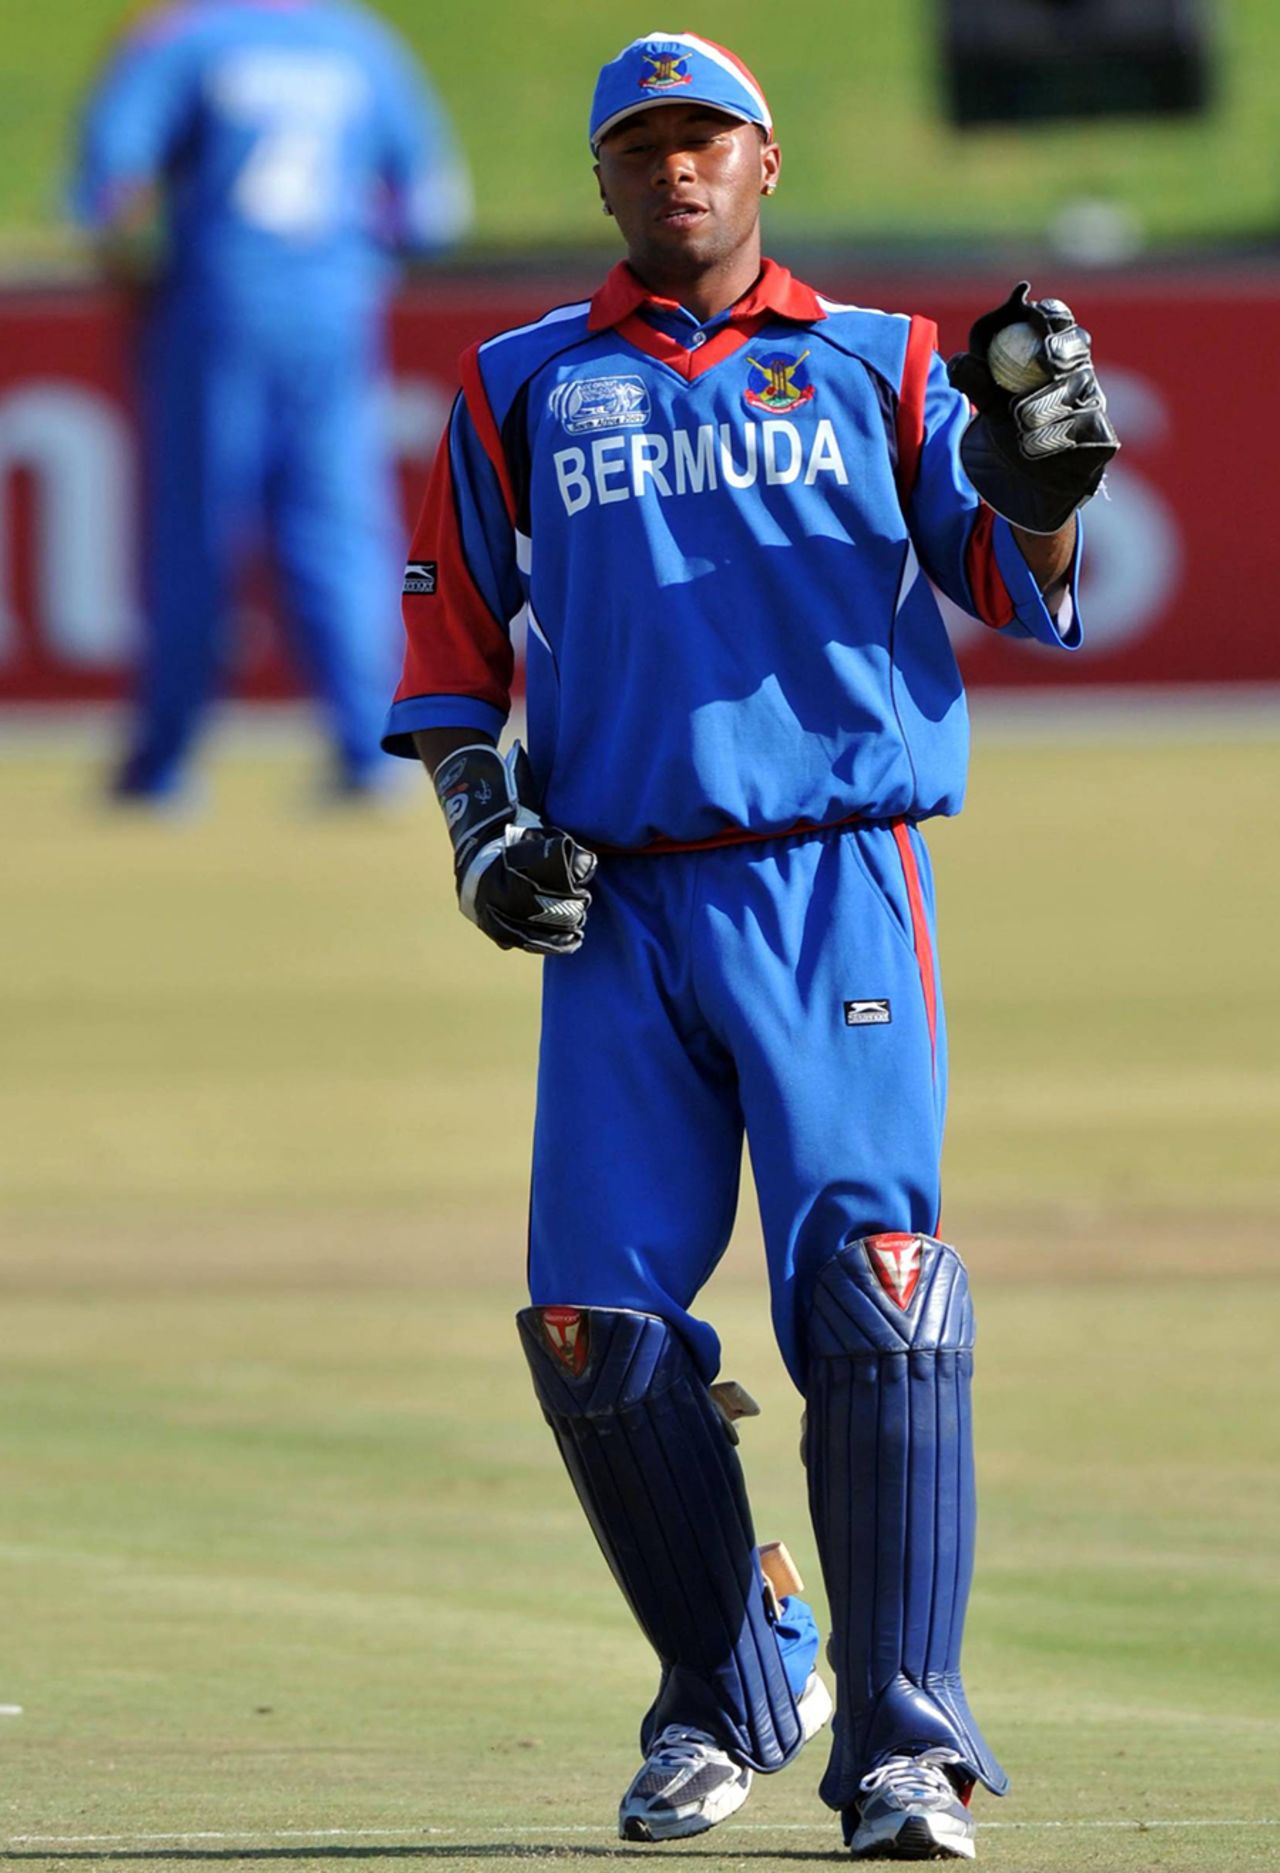 Fiqre Crockwell collects the ball, Bermuda v Kenya, ICC World Cup Qualifiers, Potchefstroom, April 6, 2009